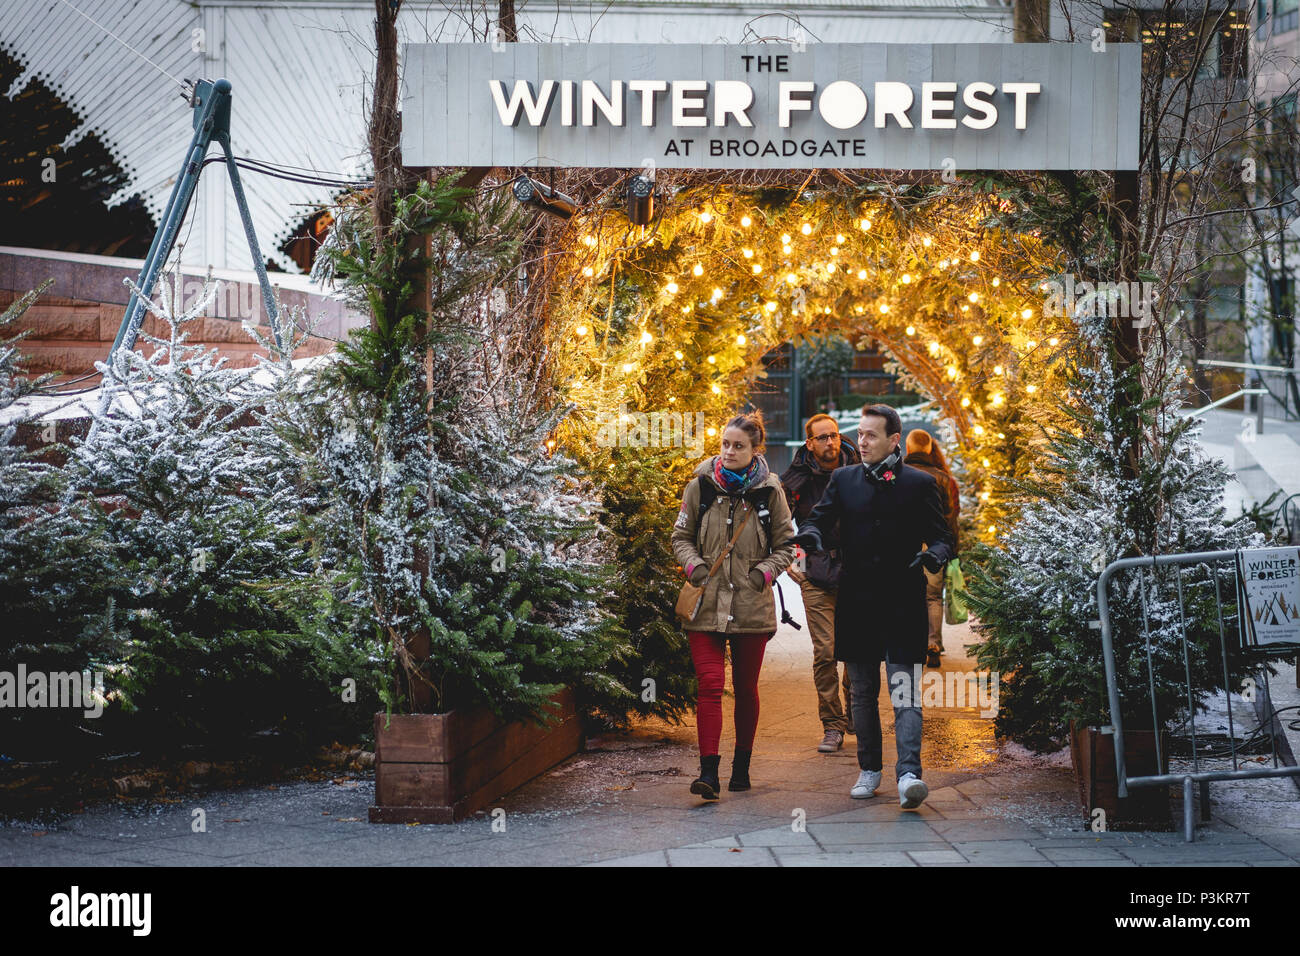 London, UK - November 2017. People in Exchange Square in Broadgate, where a Nordic-inspired forest called Winter Forest is installed at Christmas. Stock Photo